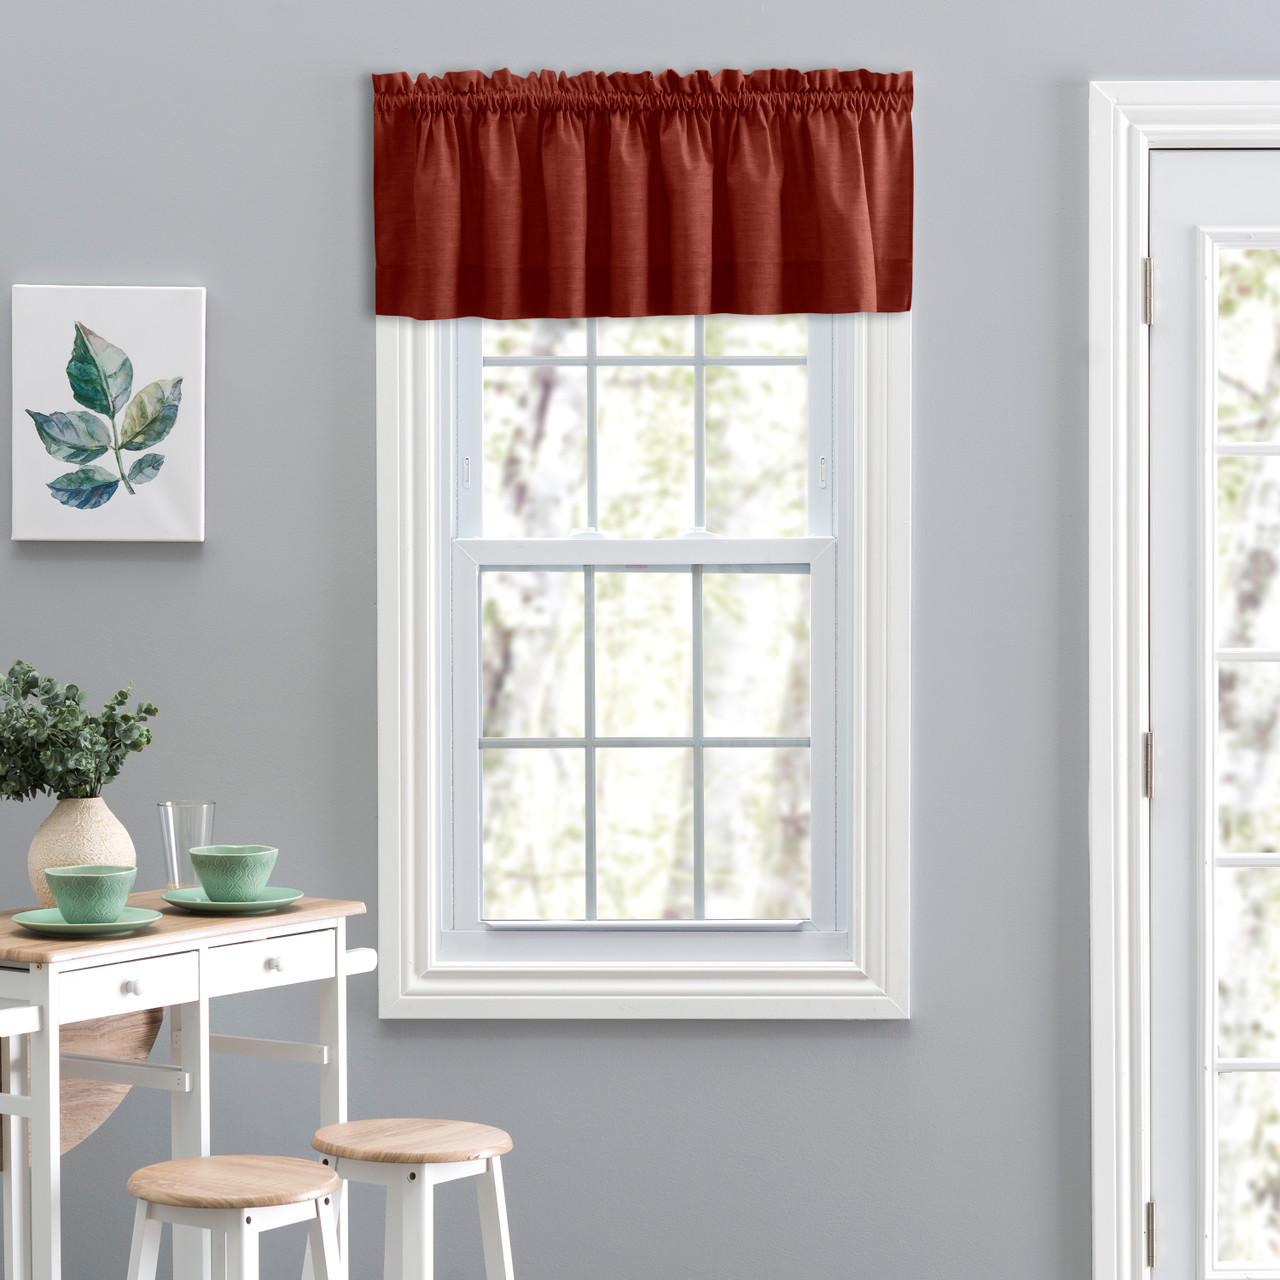 What Is a Tailored Valance Curtain?